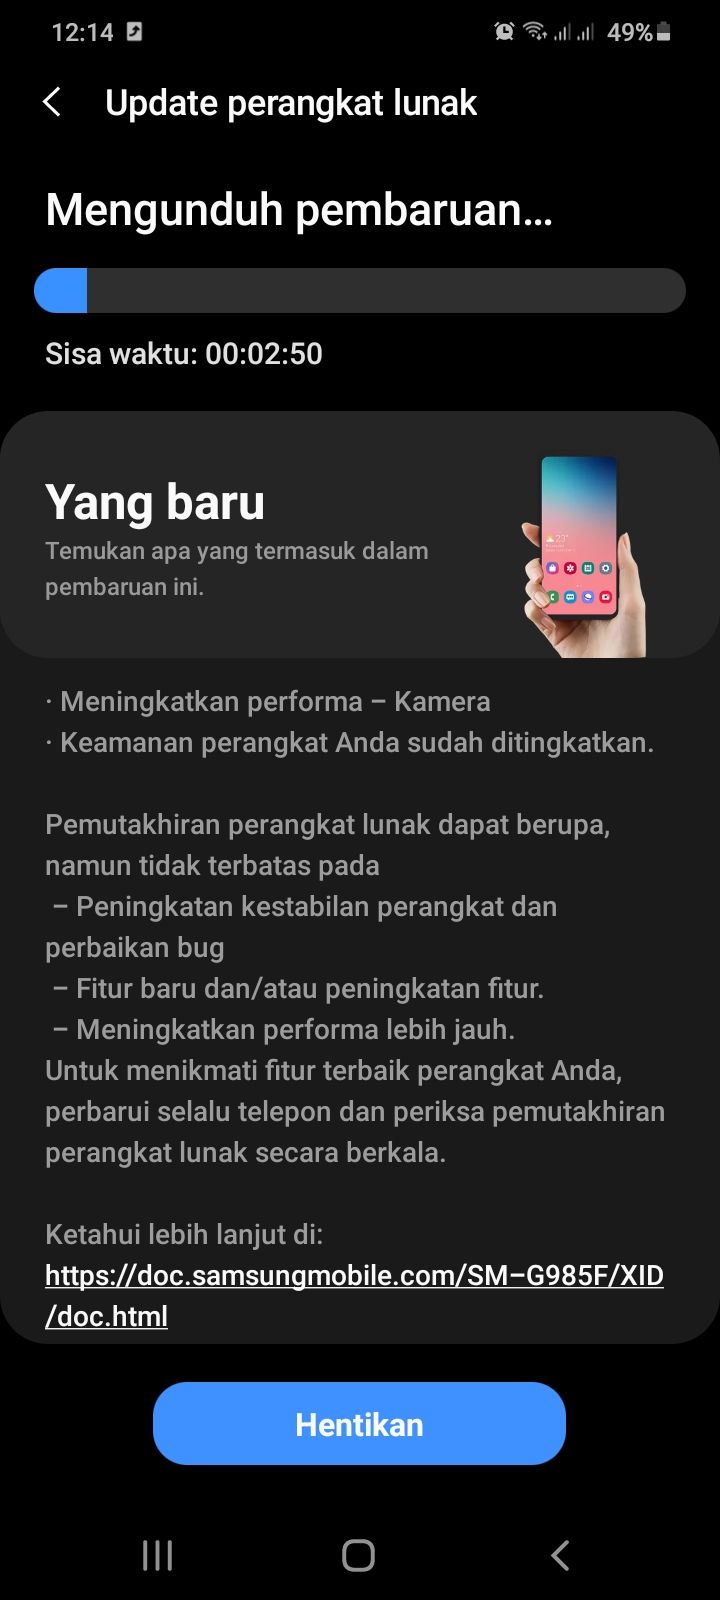 Update terbaru. Samsung Galaxy m21 Android Theme. Обновление one UI 4 Android 12. Android 12 one UI 4.1. Обновление one UI 4.1 (Android 12)самсунг m31.